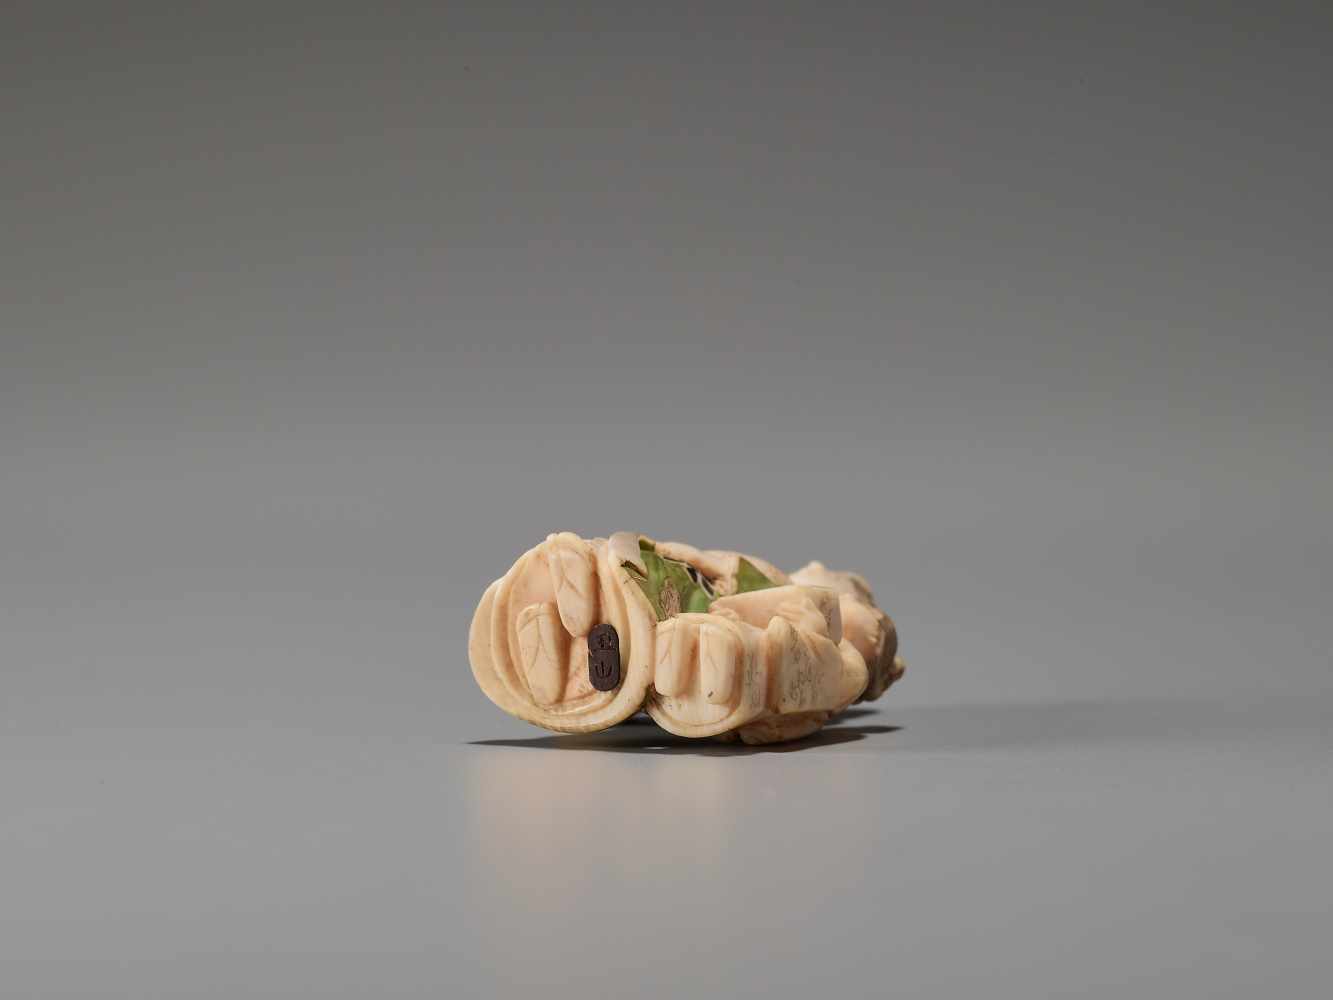 A TOKYO-SCHOOL IVORY NETSUKE OF AN OIRAN WITH A KAMURO BY GYOKUZANBy Gyokuzan, ivory netsuke with - Image 5 of 6